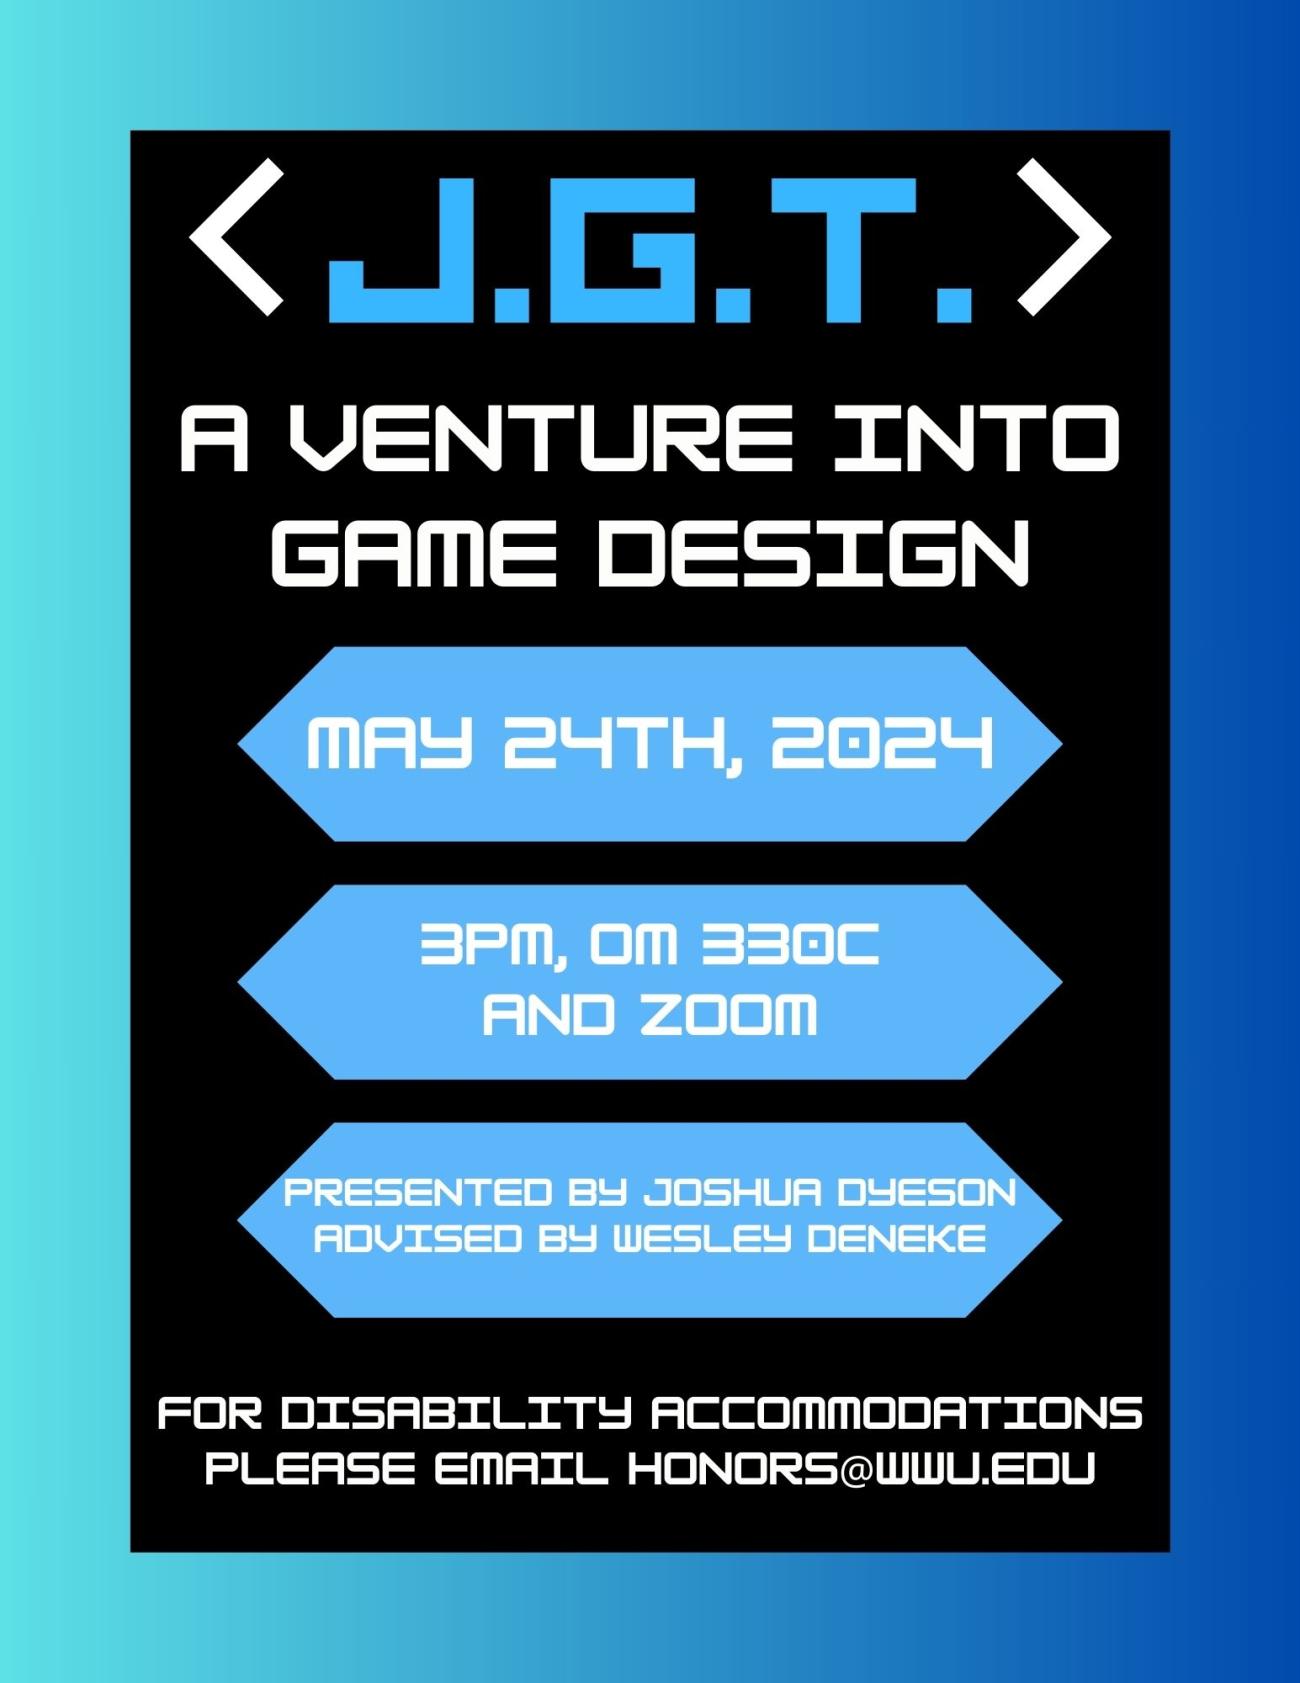 Teal to blue background containing a black rectangle. Text reads “J.G.T. : A Venture Into Game Design. May 24th, 2024. 3pm, Old Main 330C and Zoom. Presented by Joshua Dyeson. Advised by Wesley Deneke. For disability accommodations please email honors@wwu.edu”.